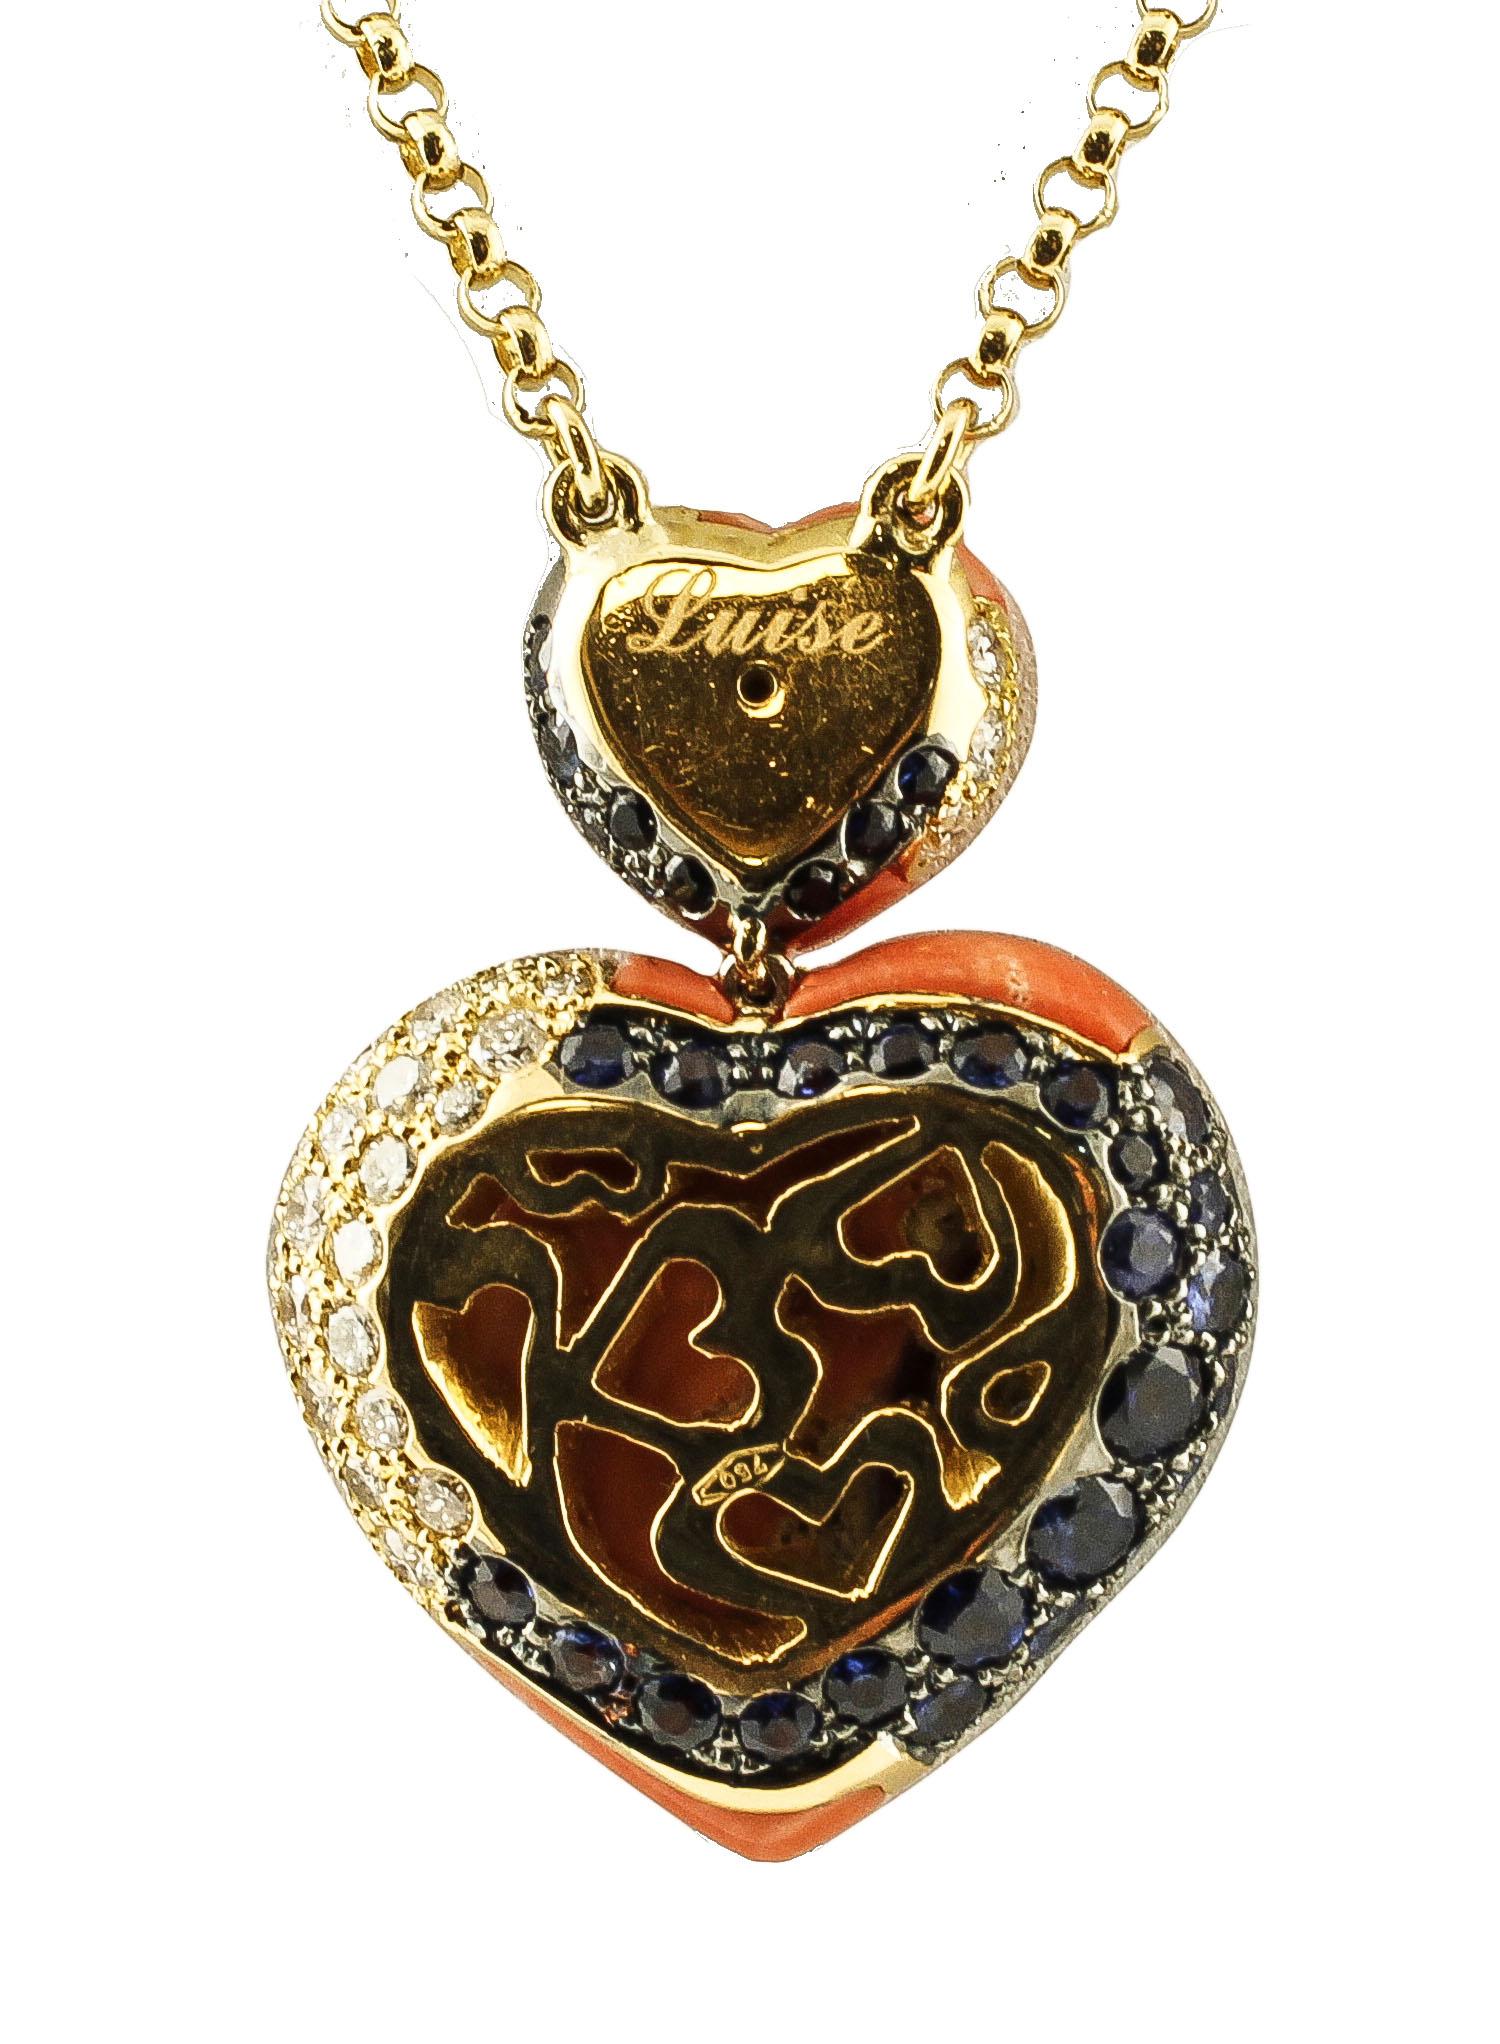 Retro 18K Gold Chain Necklace with Red Coral, Diamonds & Sapphire Heart Pendant